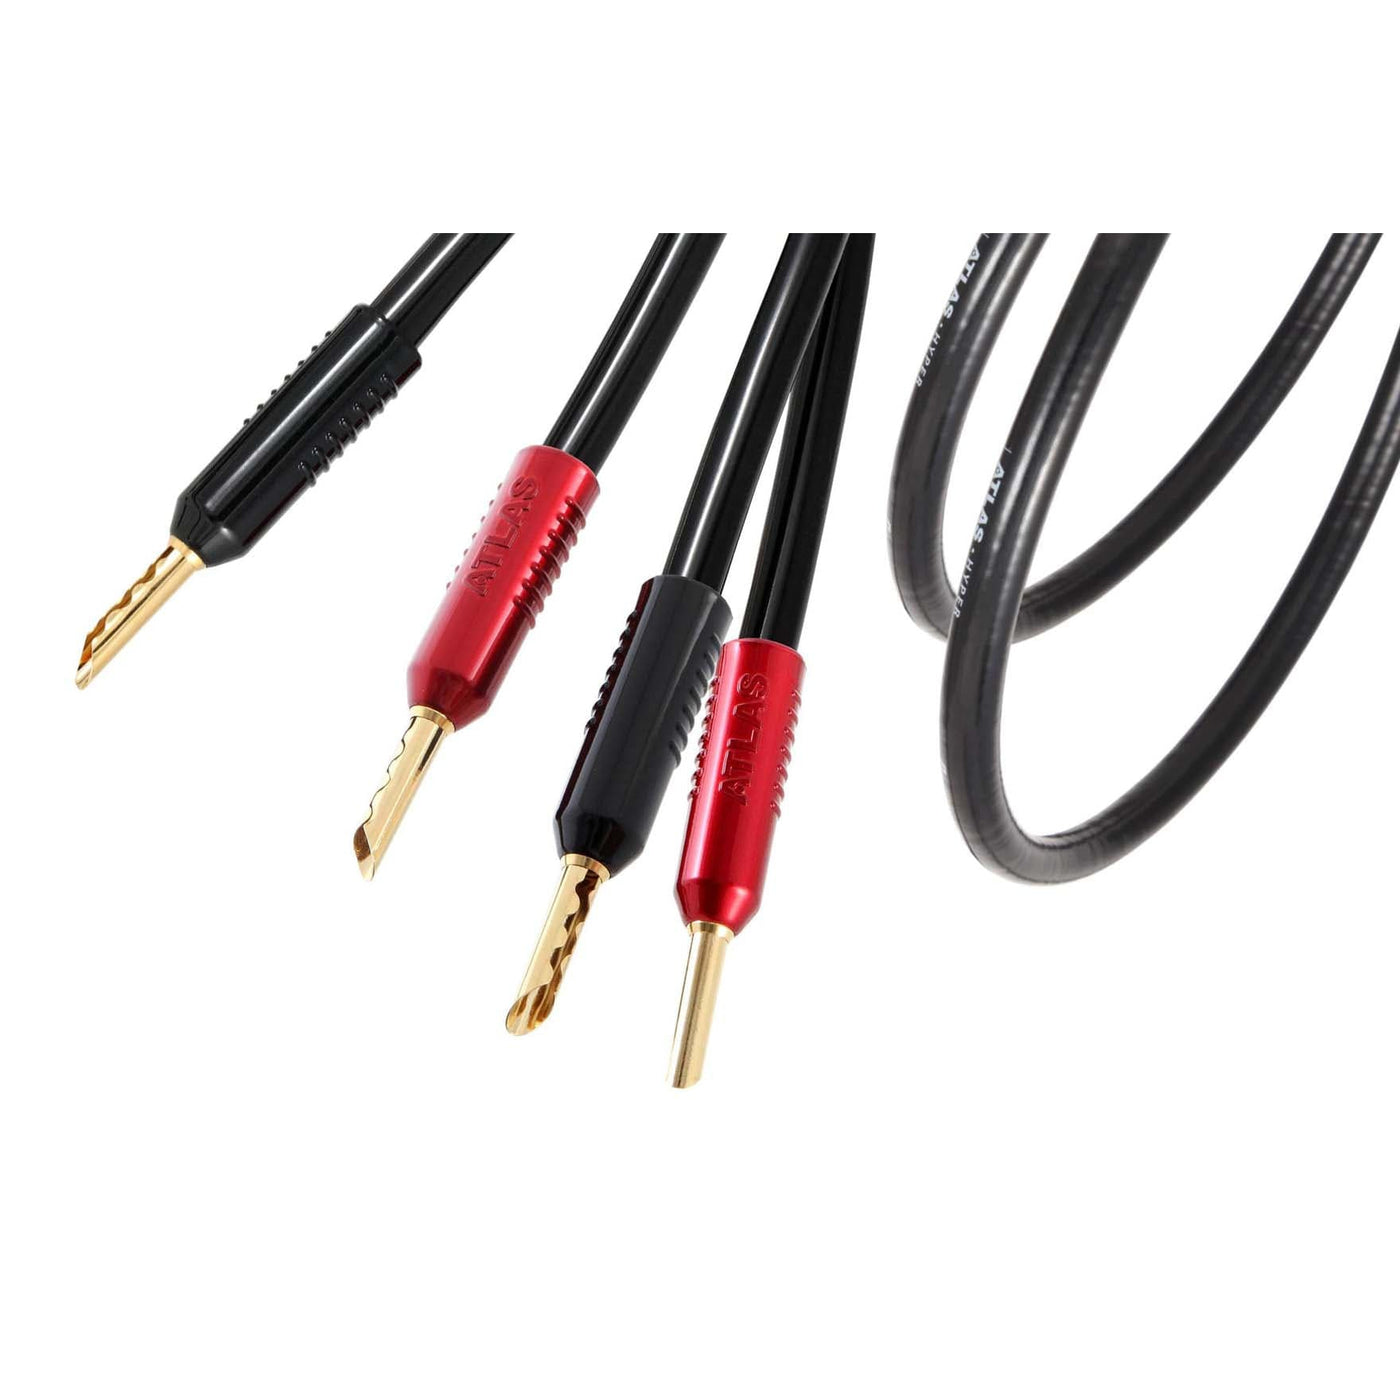 Atlas Hyper Achromatic 3.5 Speaker Cable at Audio Influence